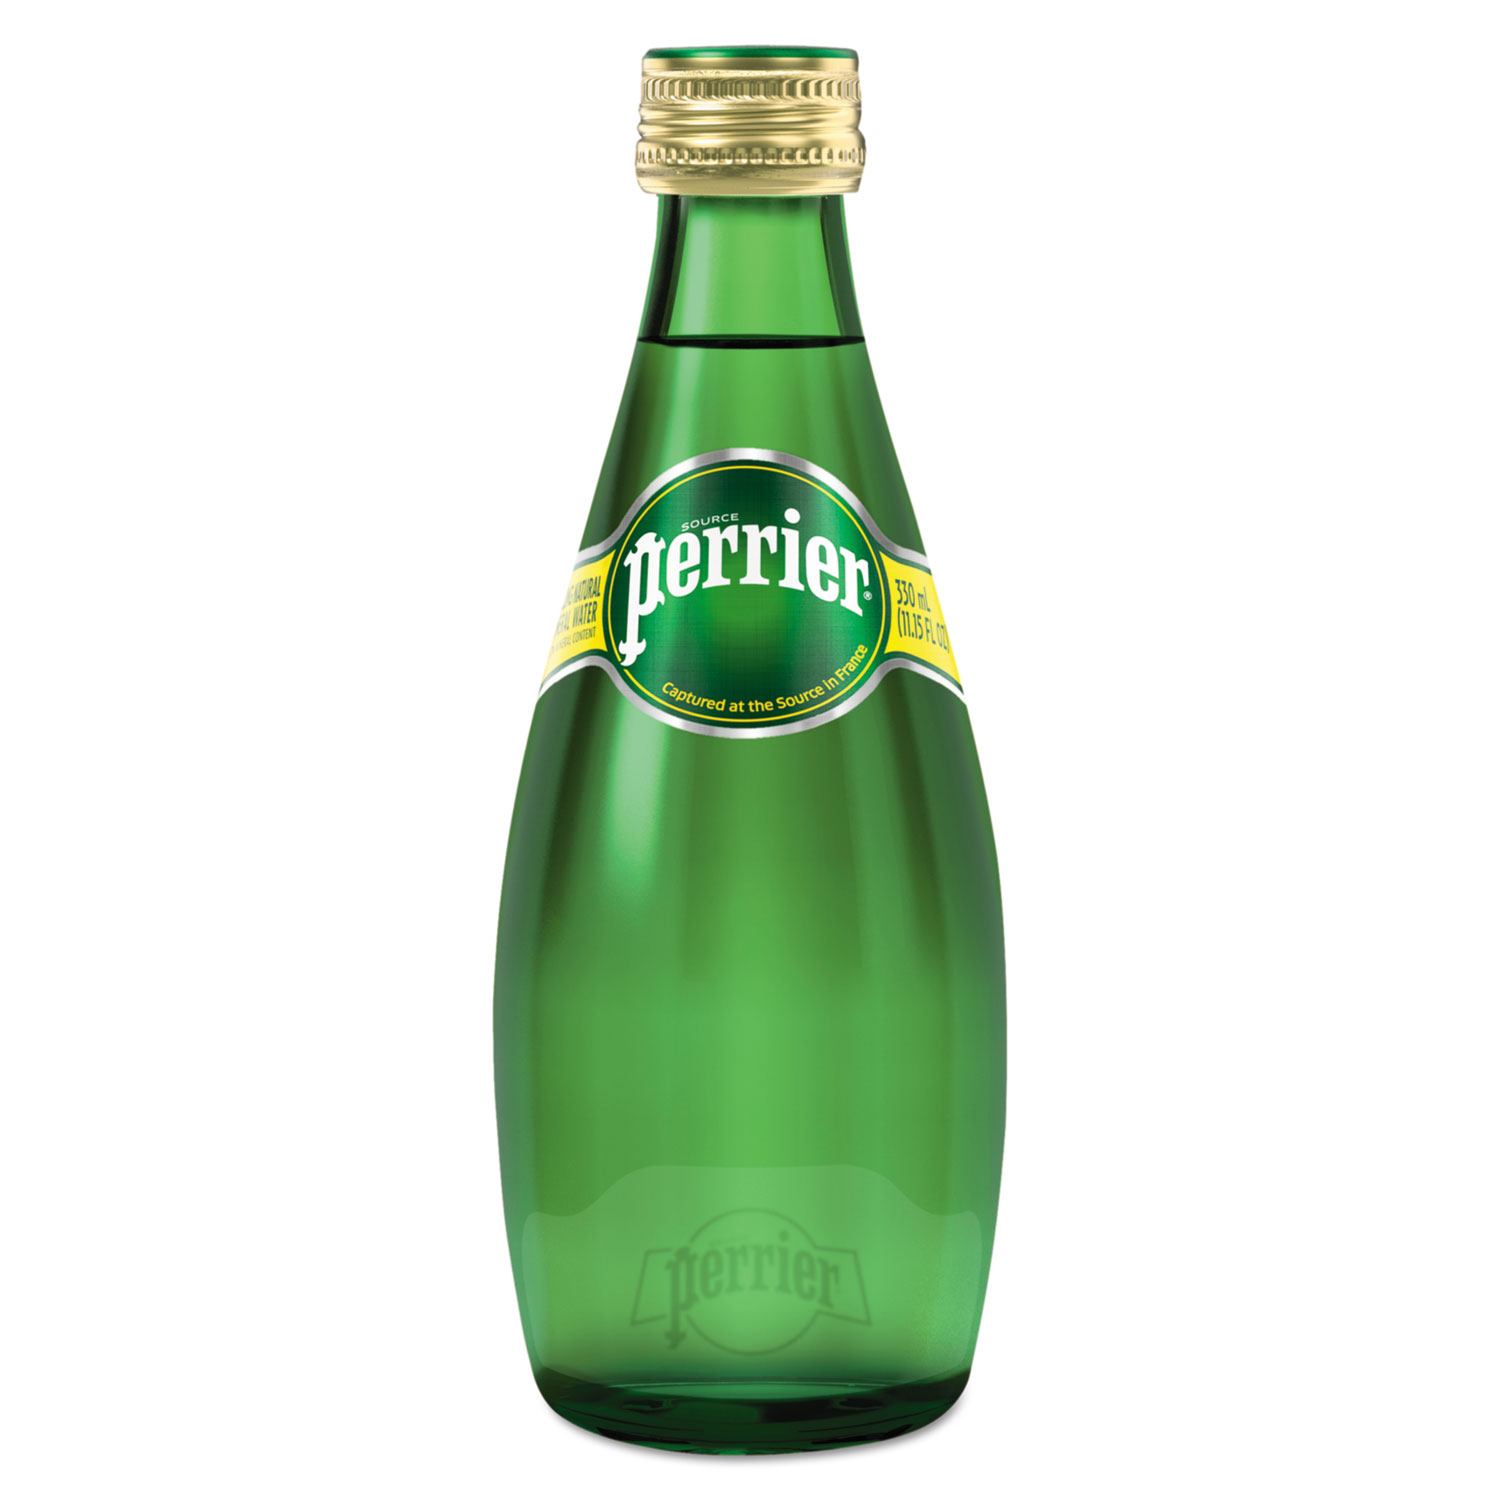  Perrier 12368680 Sparkling Natural Mineral Water, 11 oz Bottle, 24/Carton (NLE00410) 